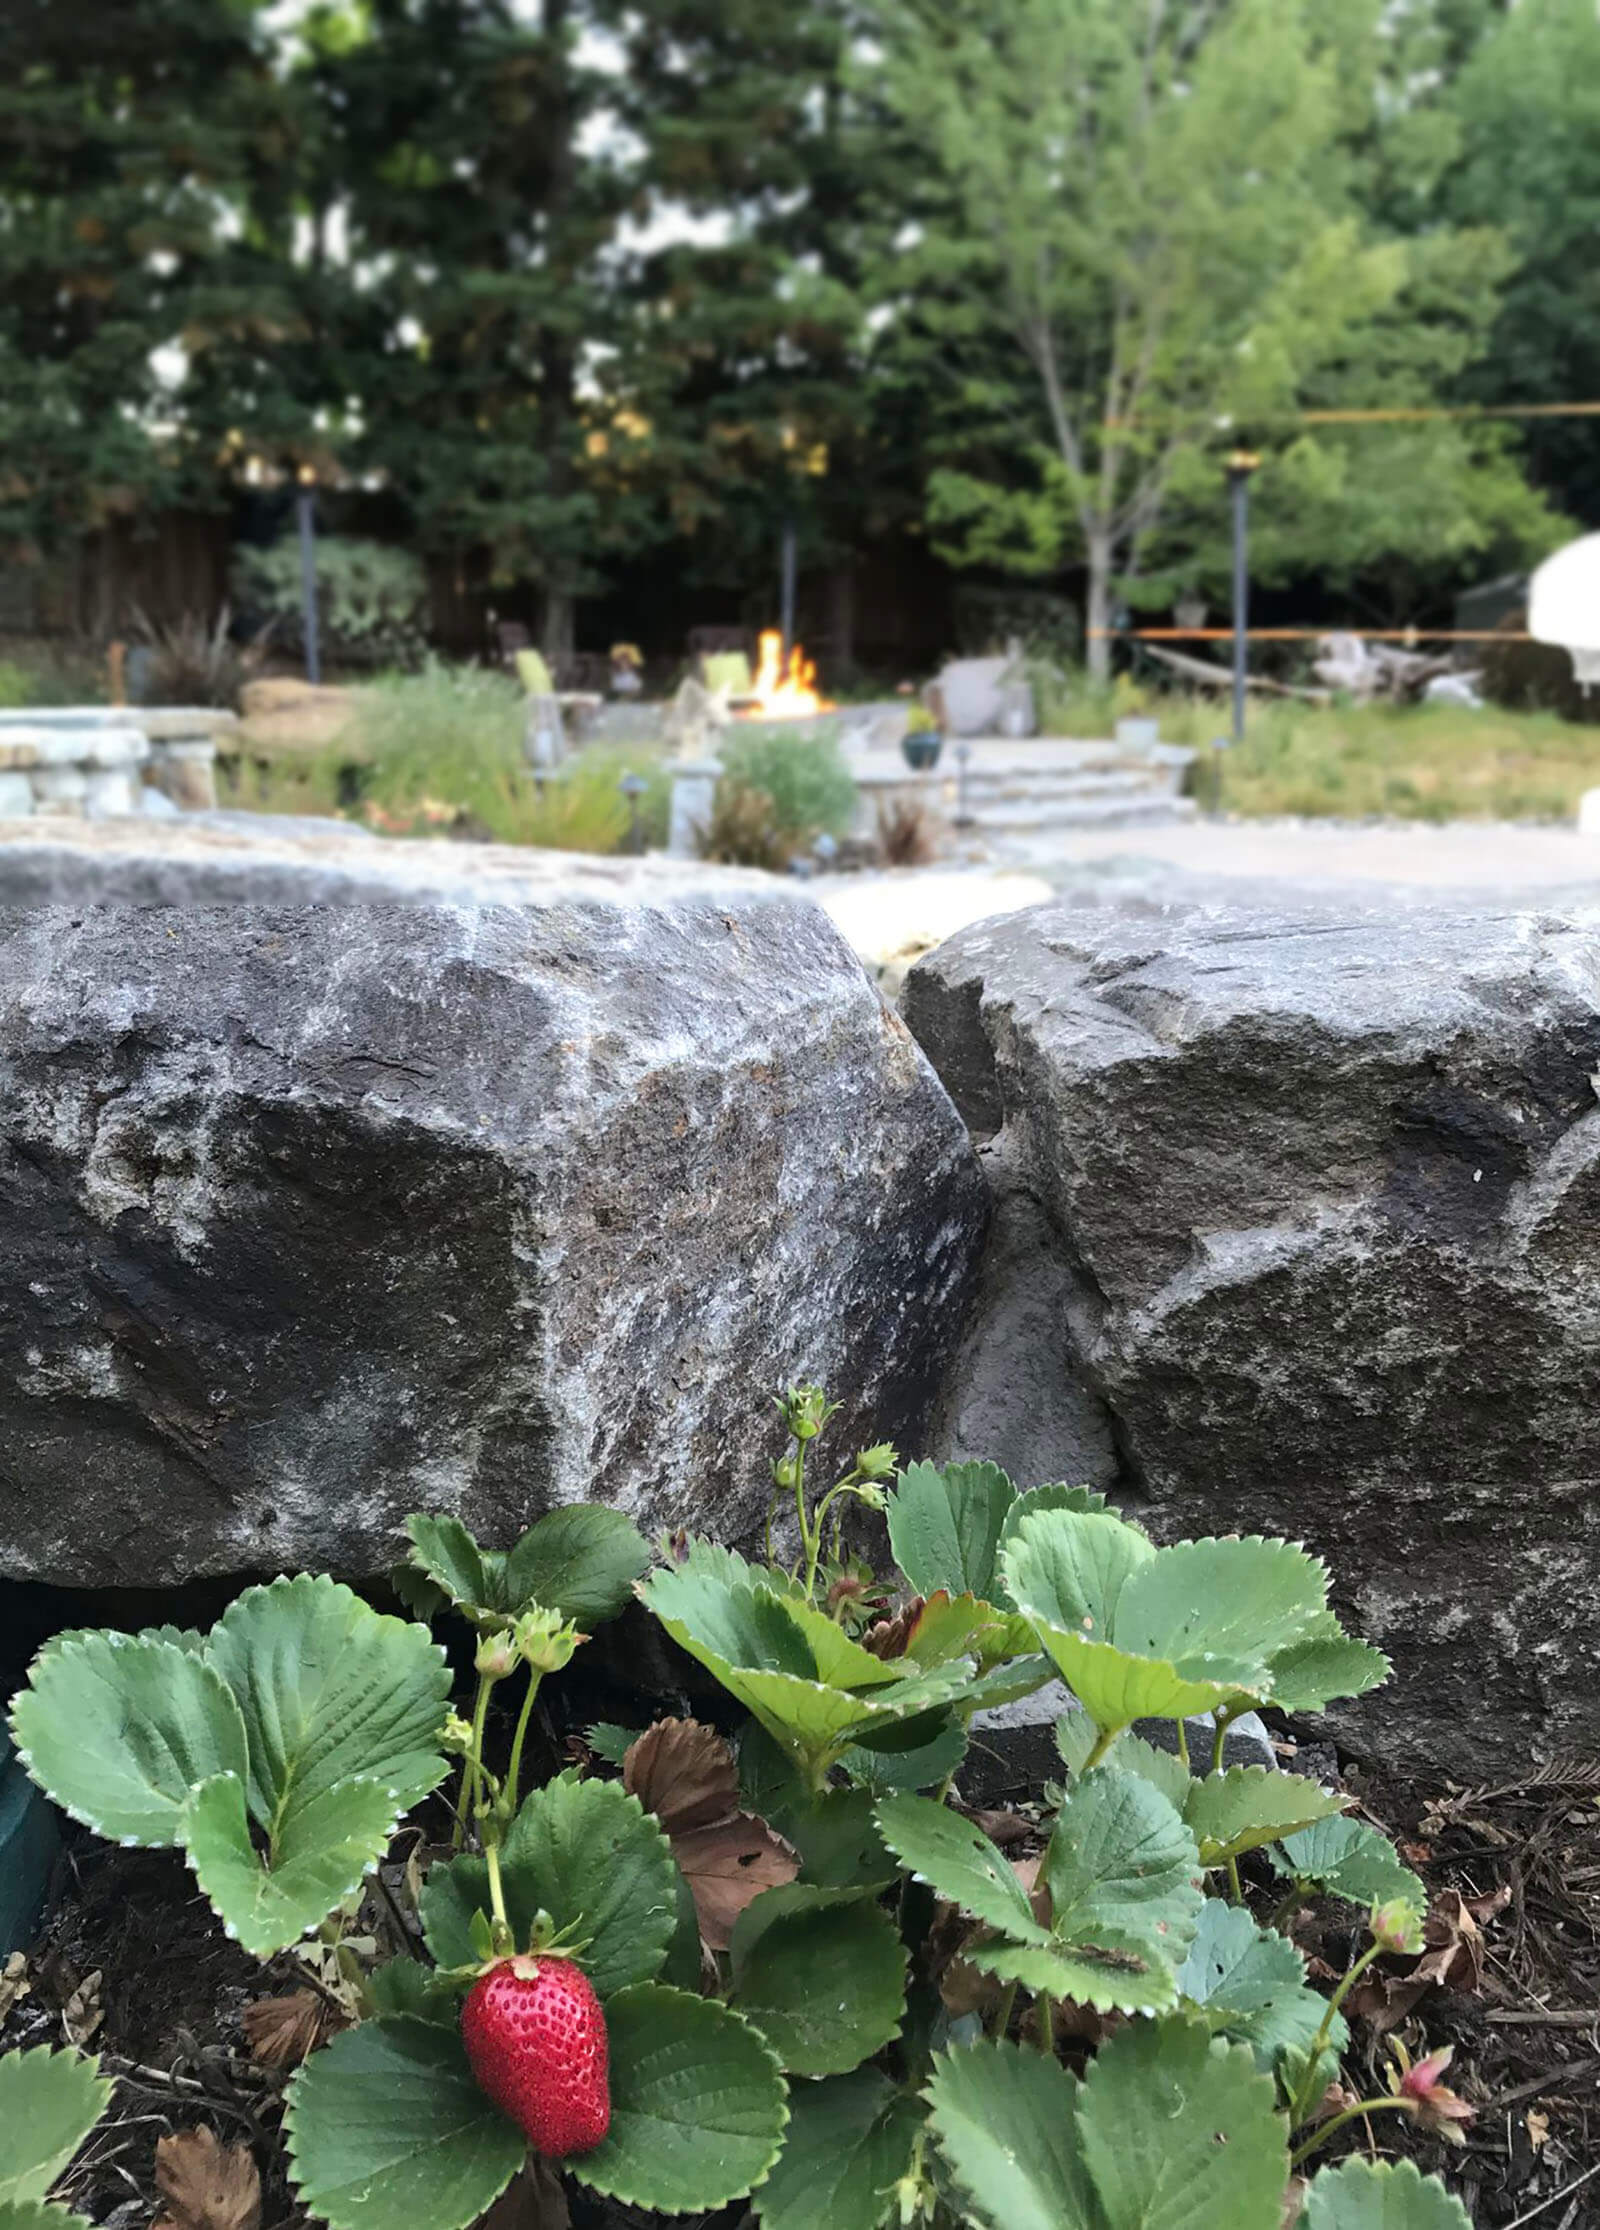 Little stone planter with strawberries